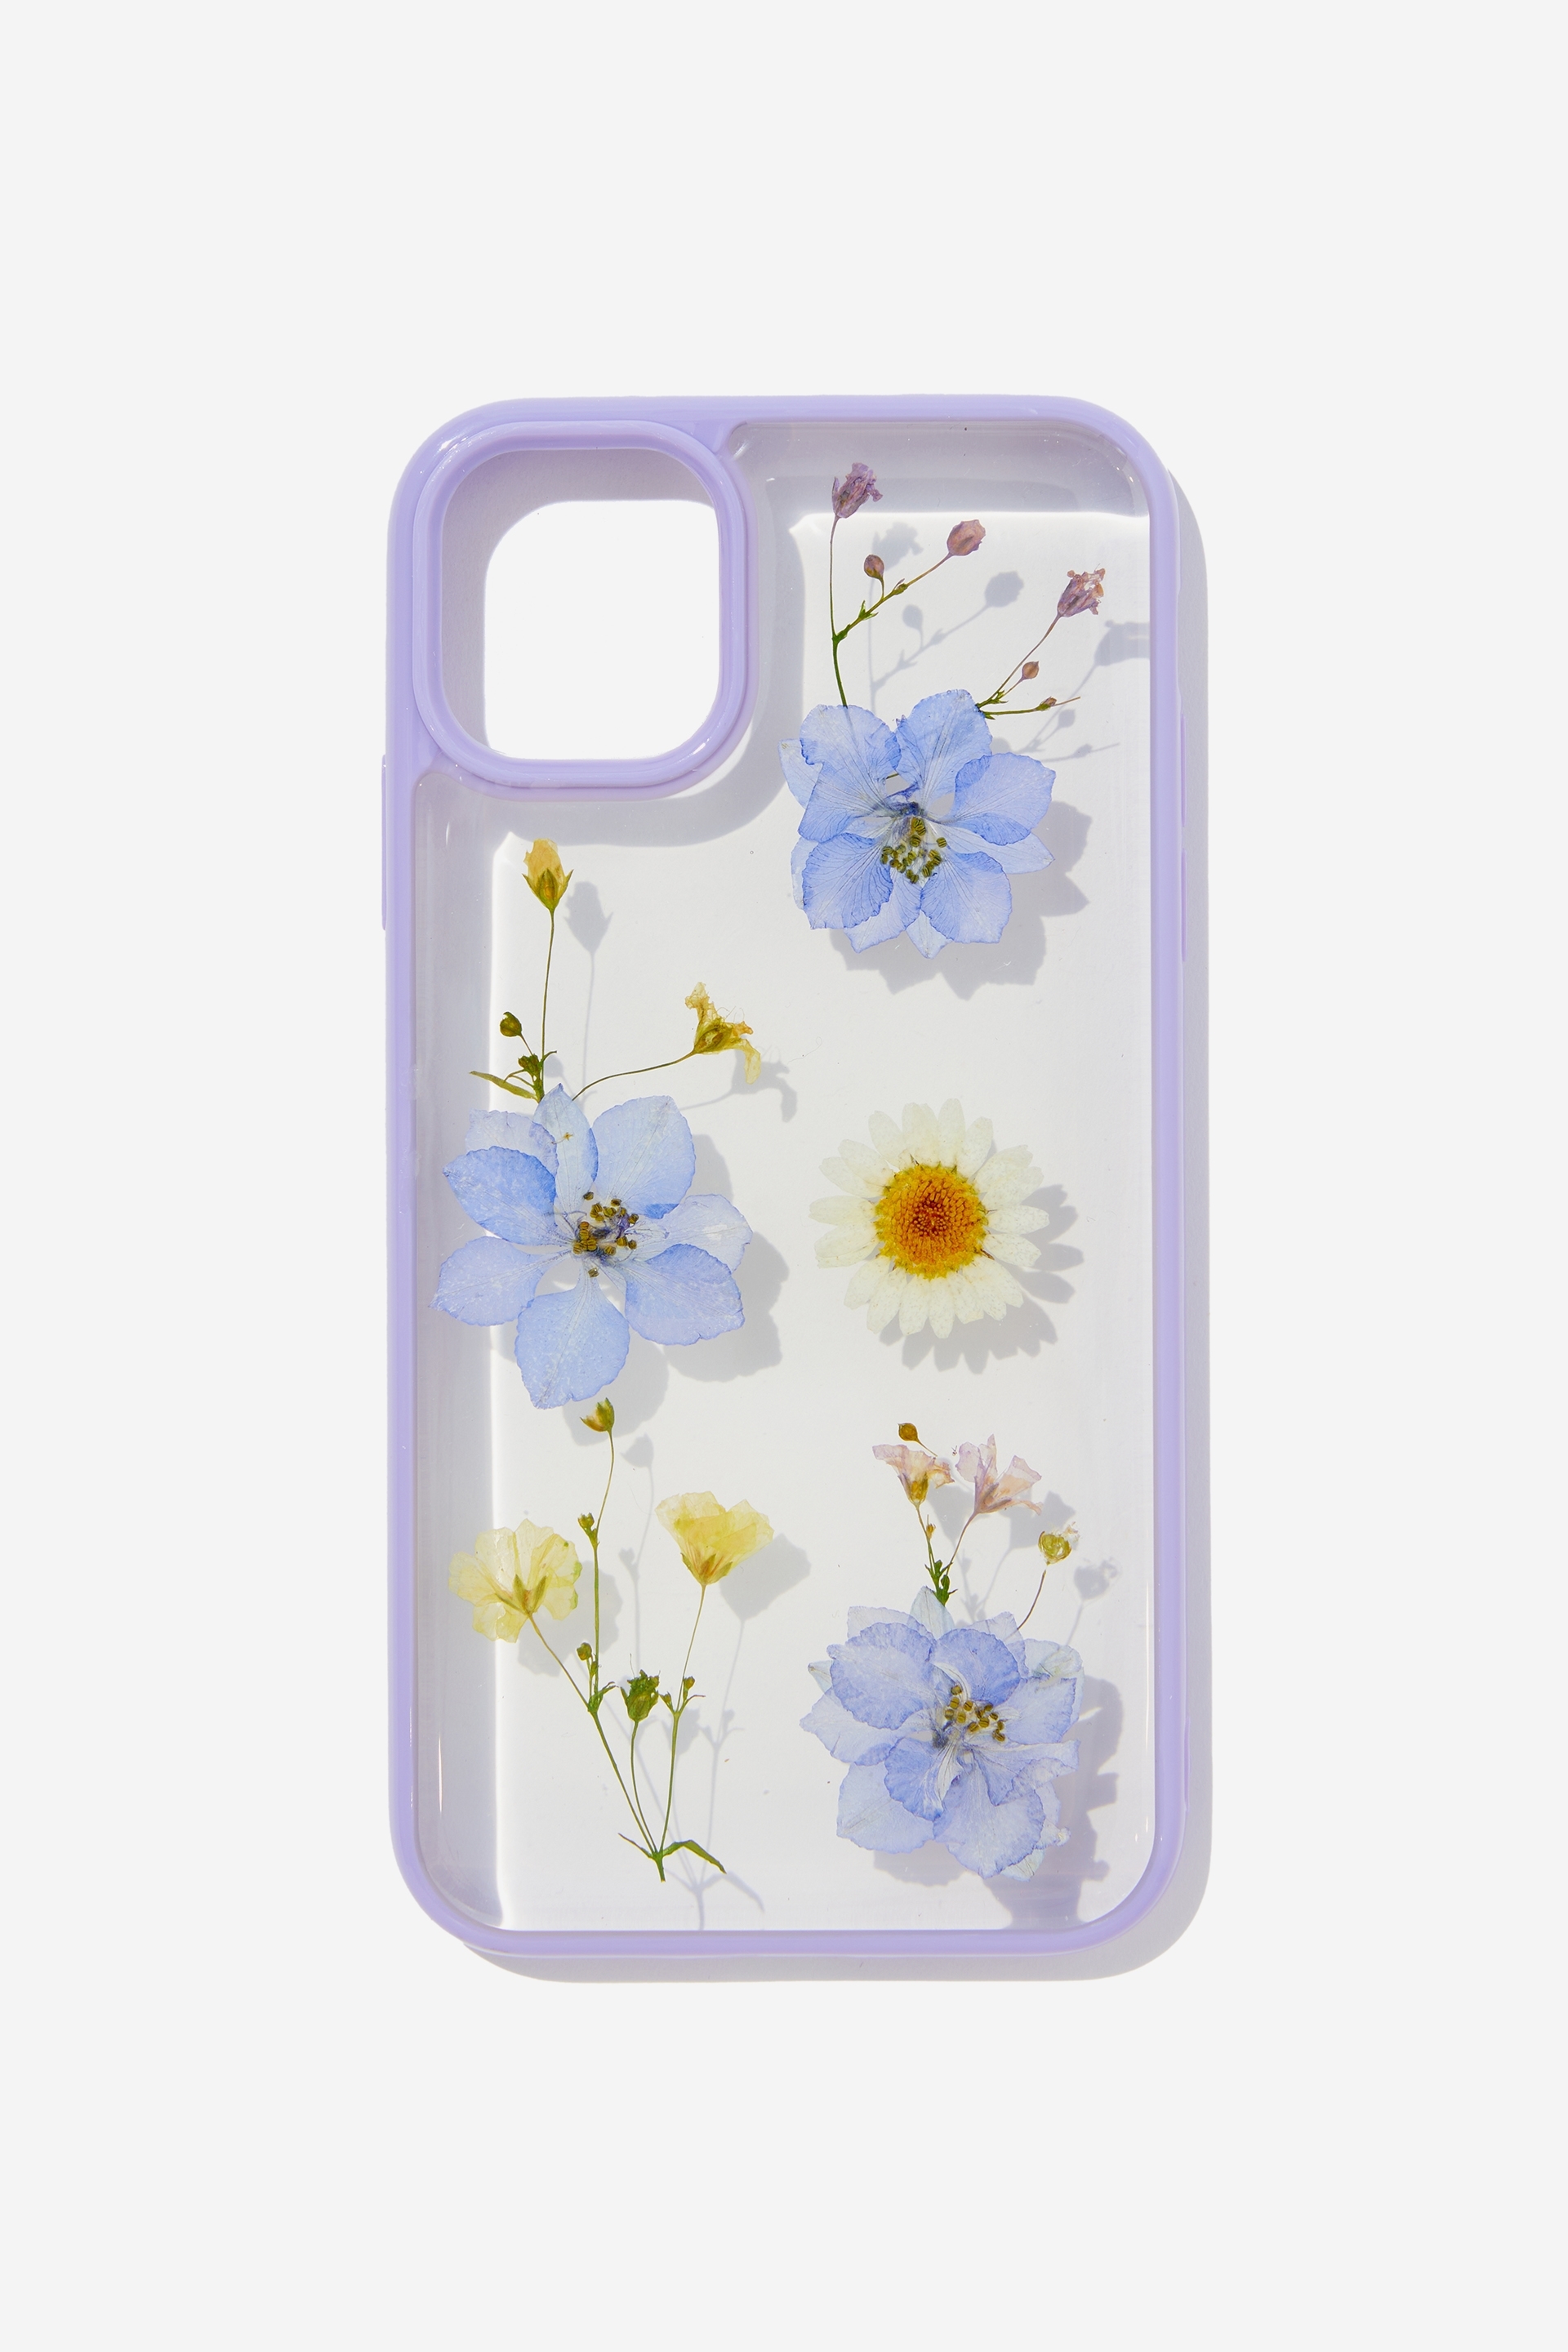 Typo - Protective Phone Case iPhone 11 - Trapped purple daisy / purple